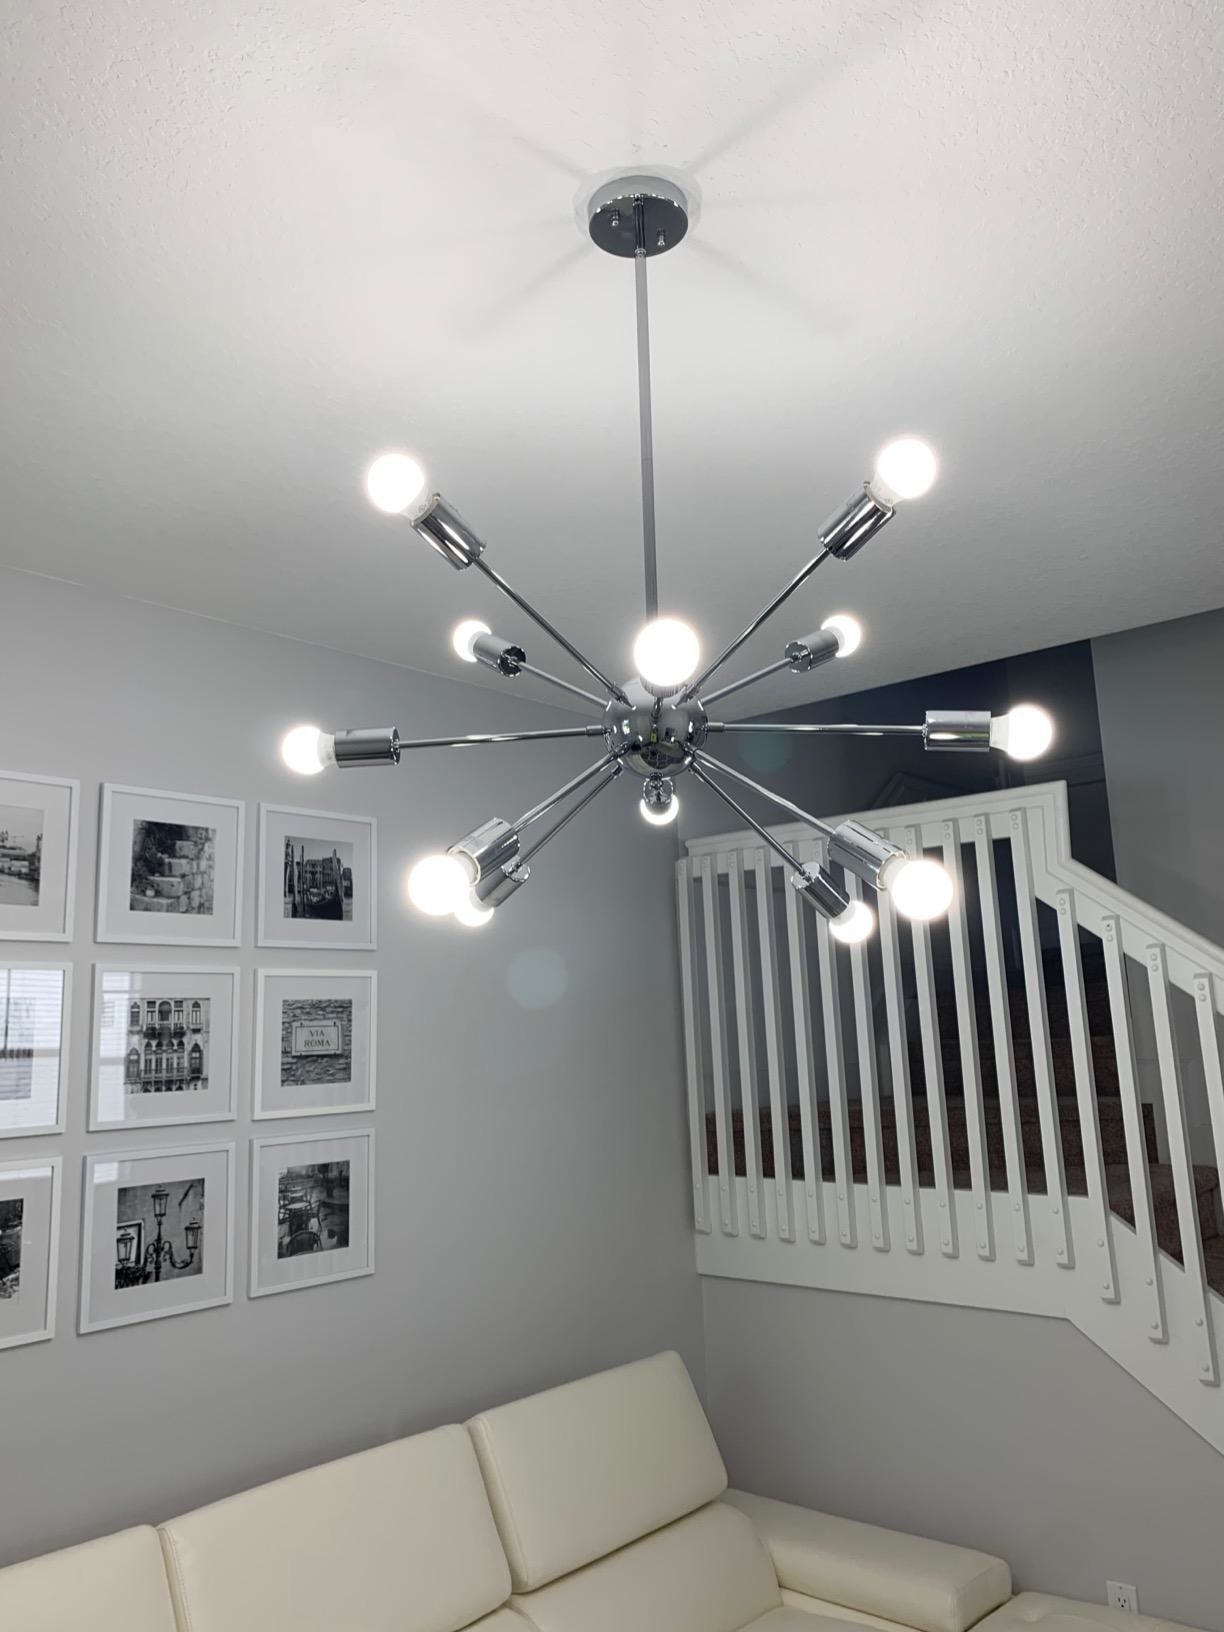 reviewer image of the chandelier with 12 silver arms and light bulbs hanging from a celiling